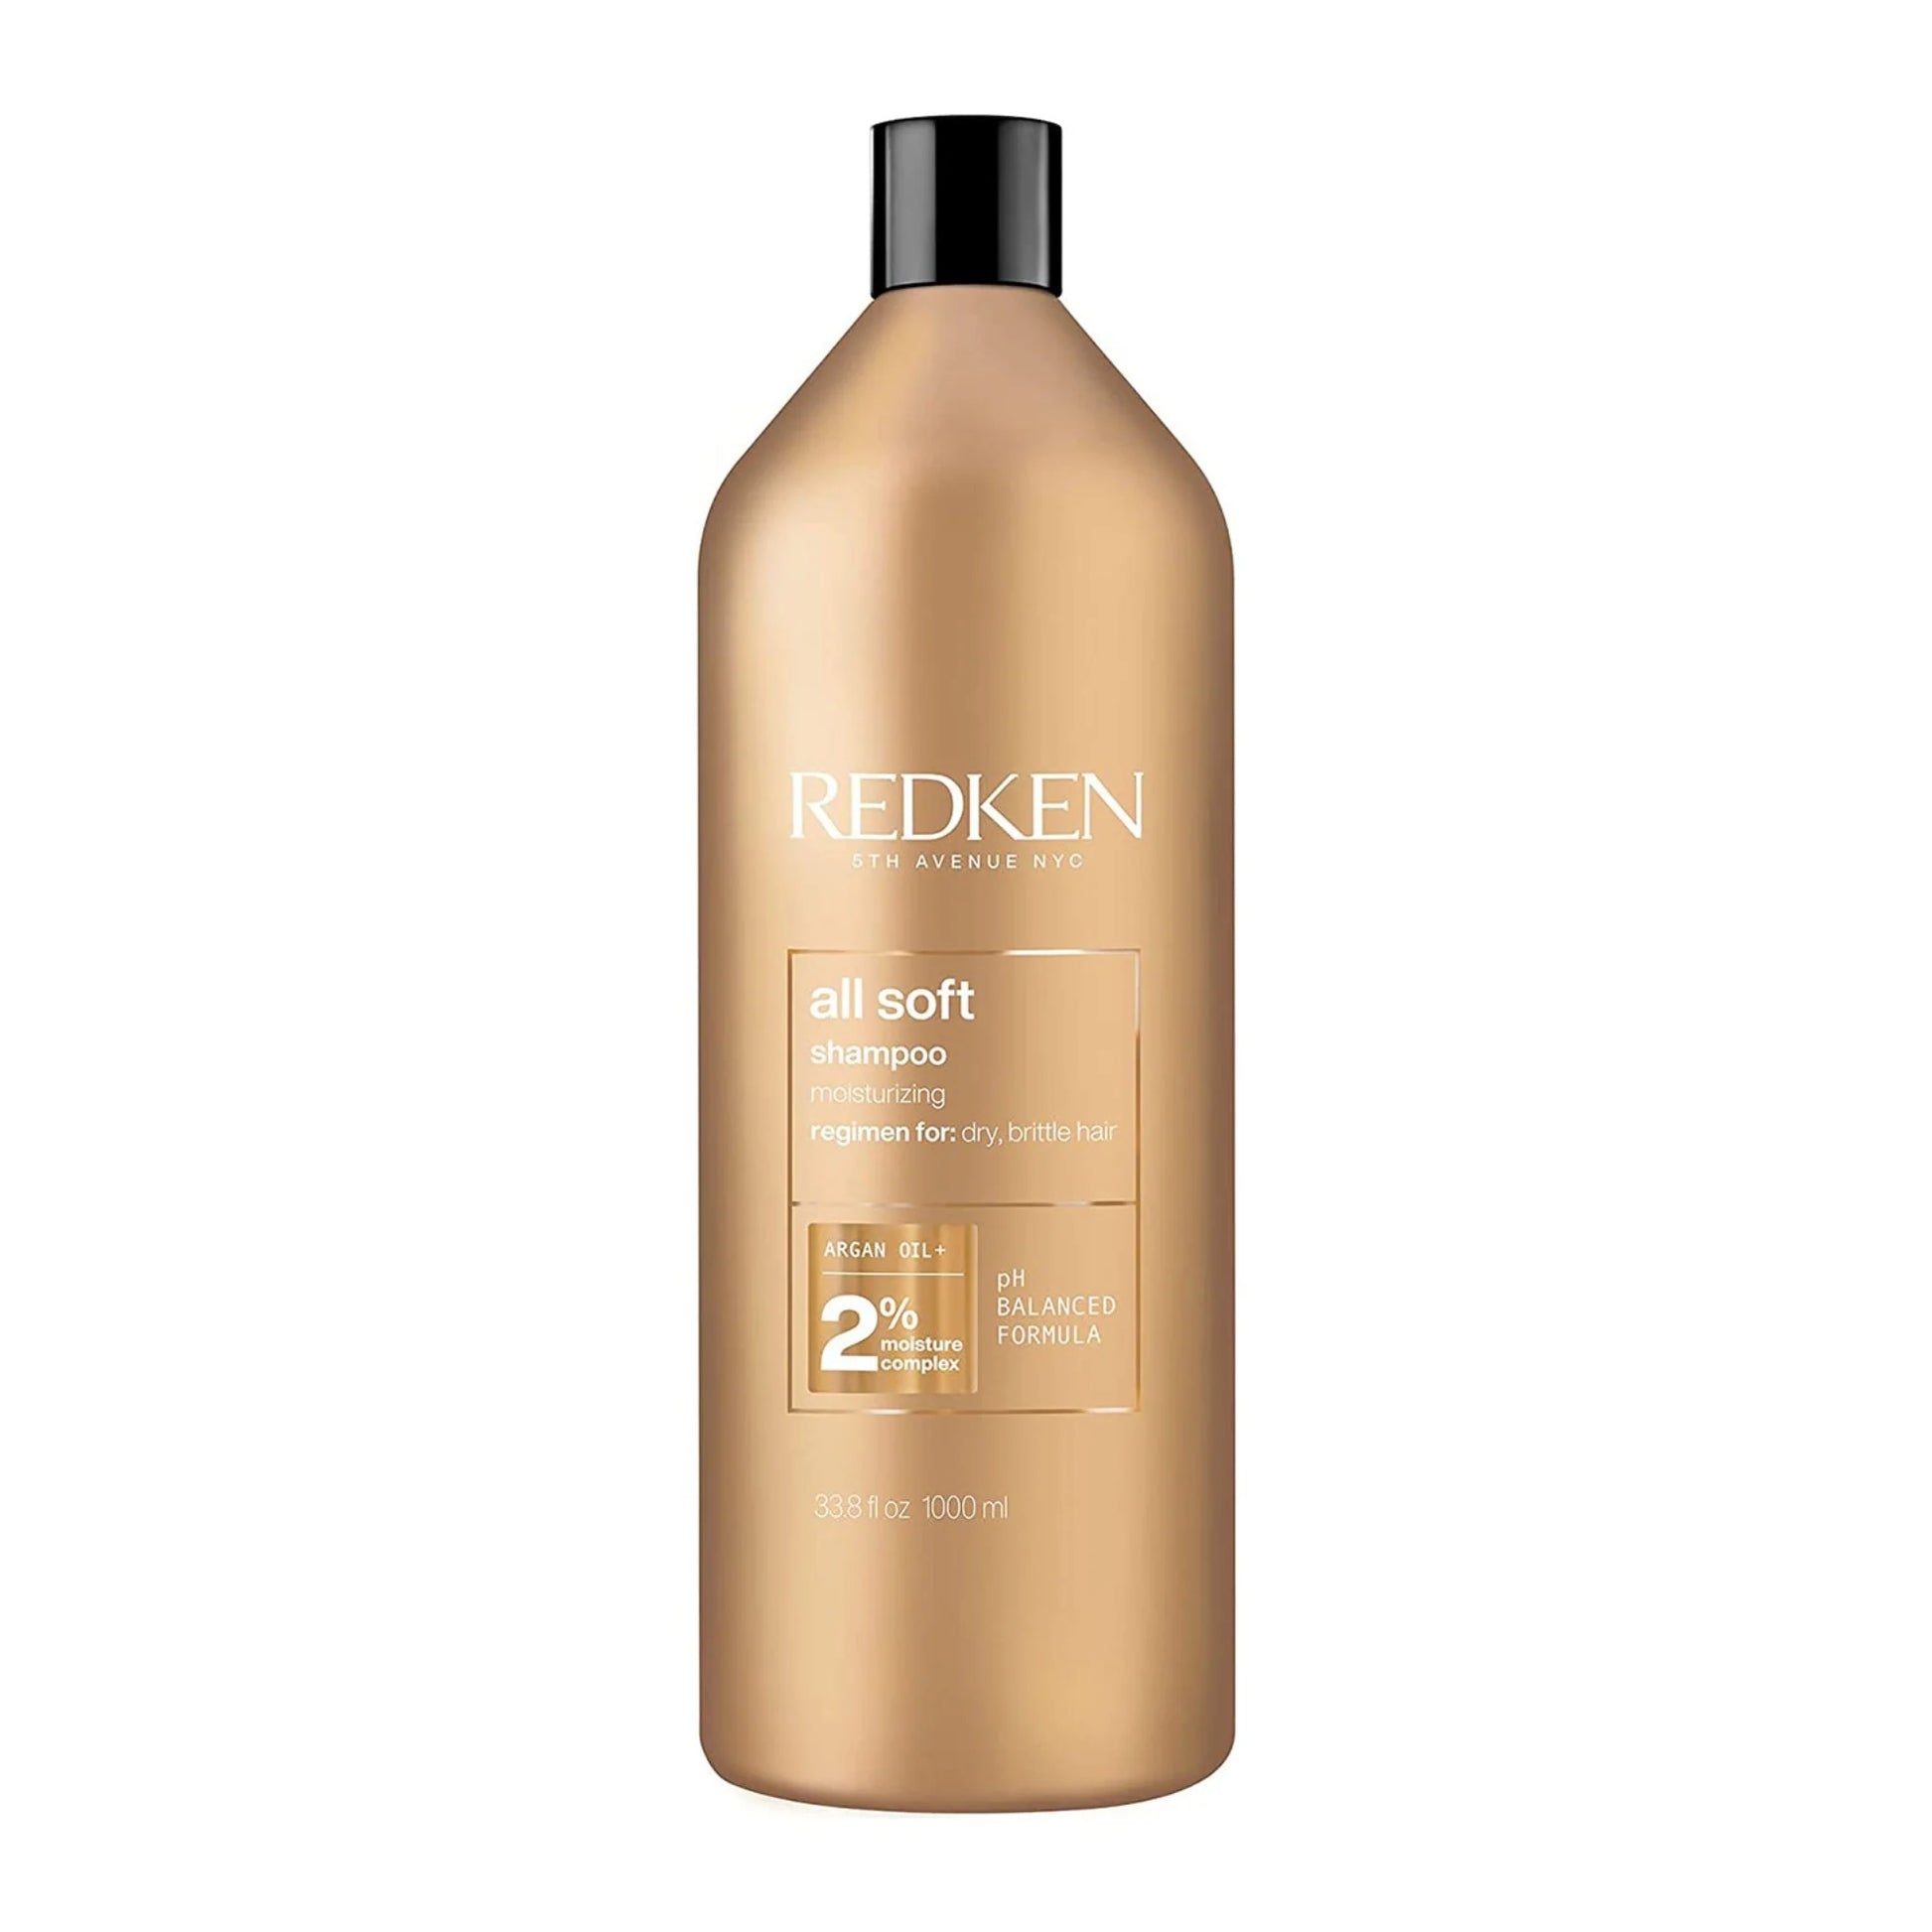 All Soft Shampoo and Conditioner Liter ($104 Value)